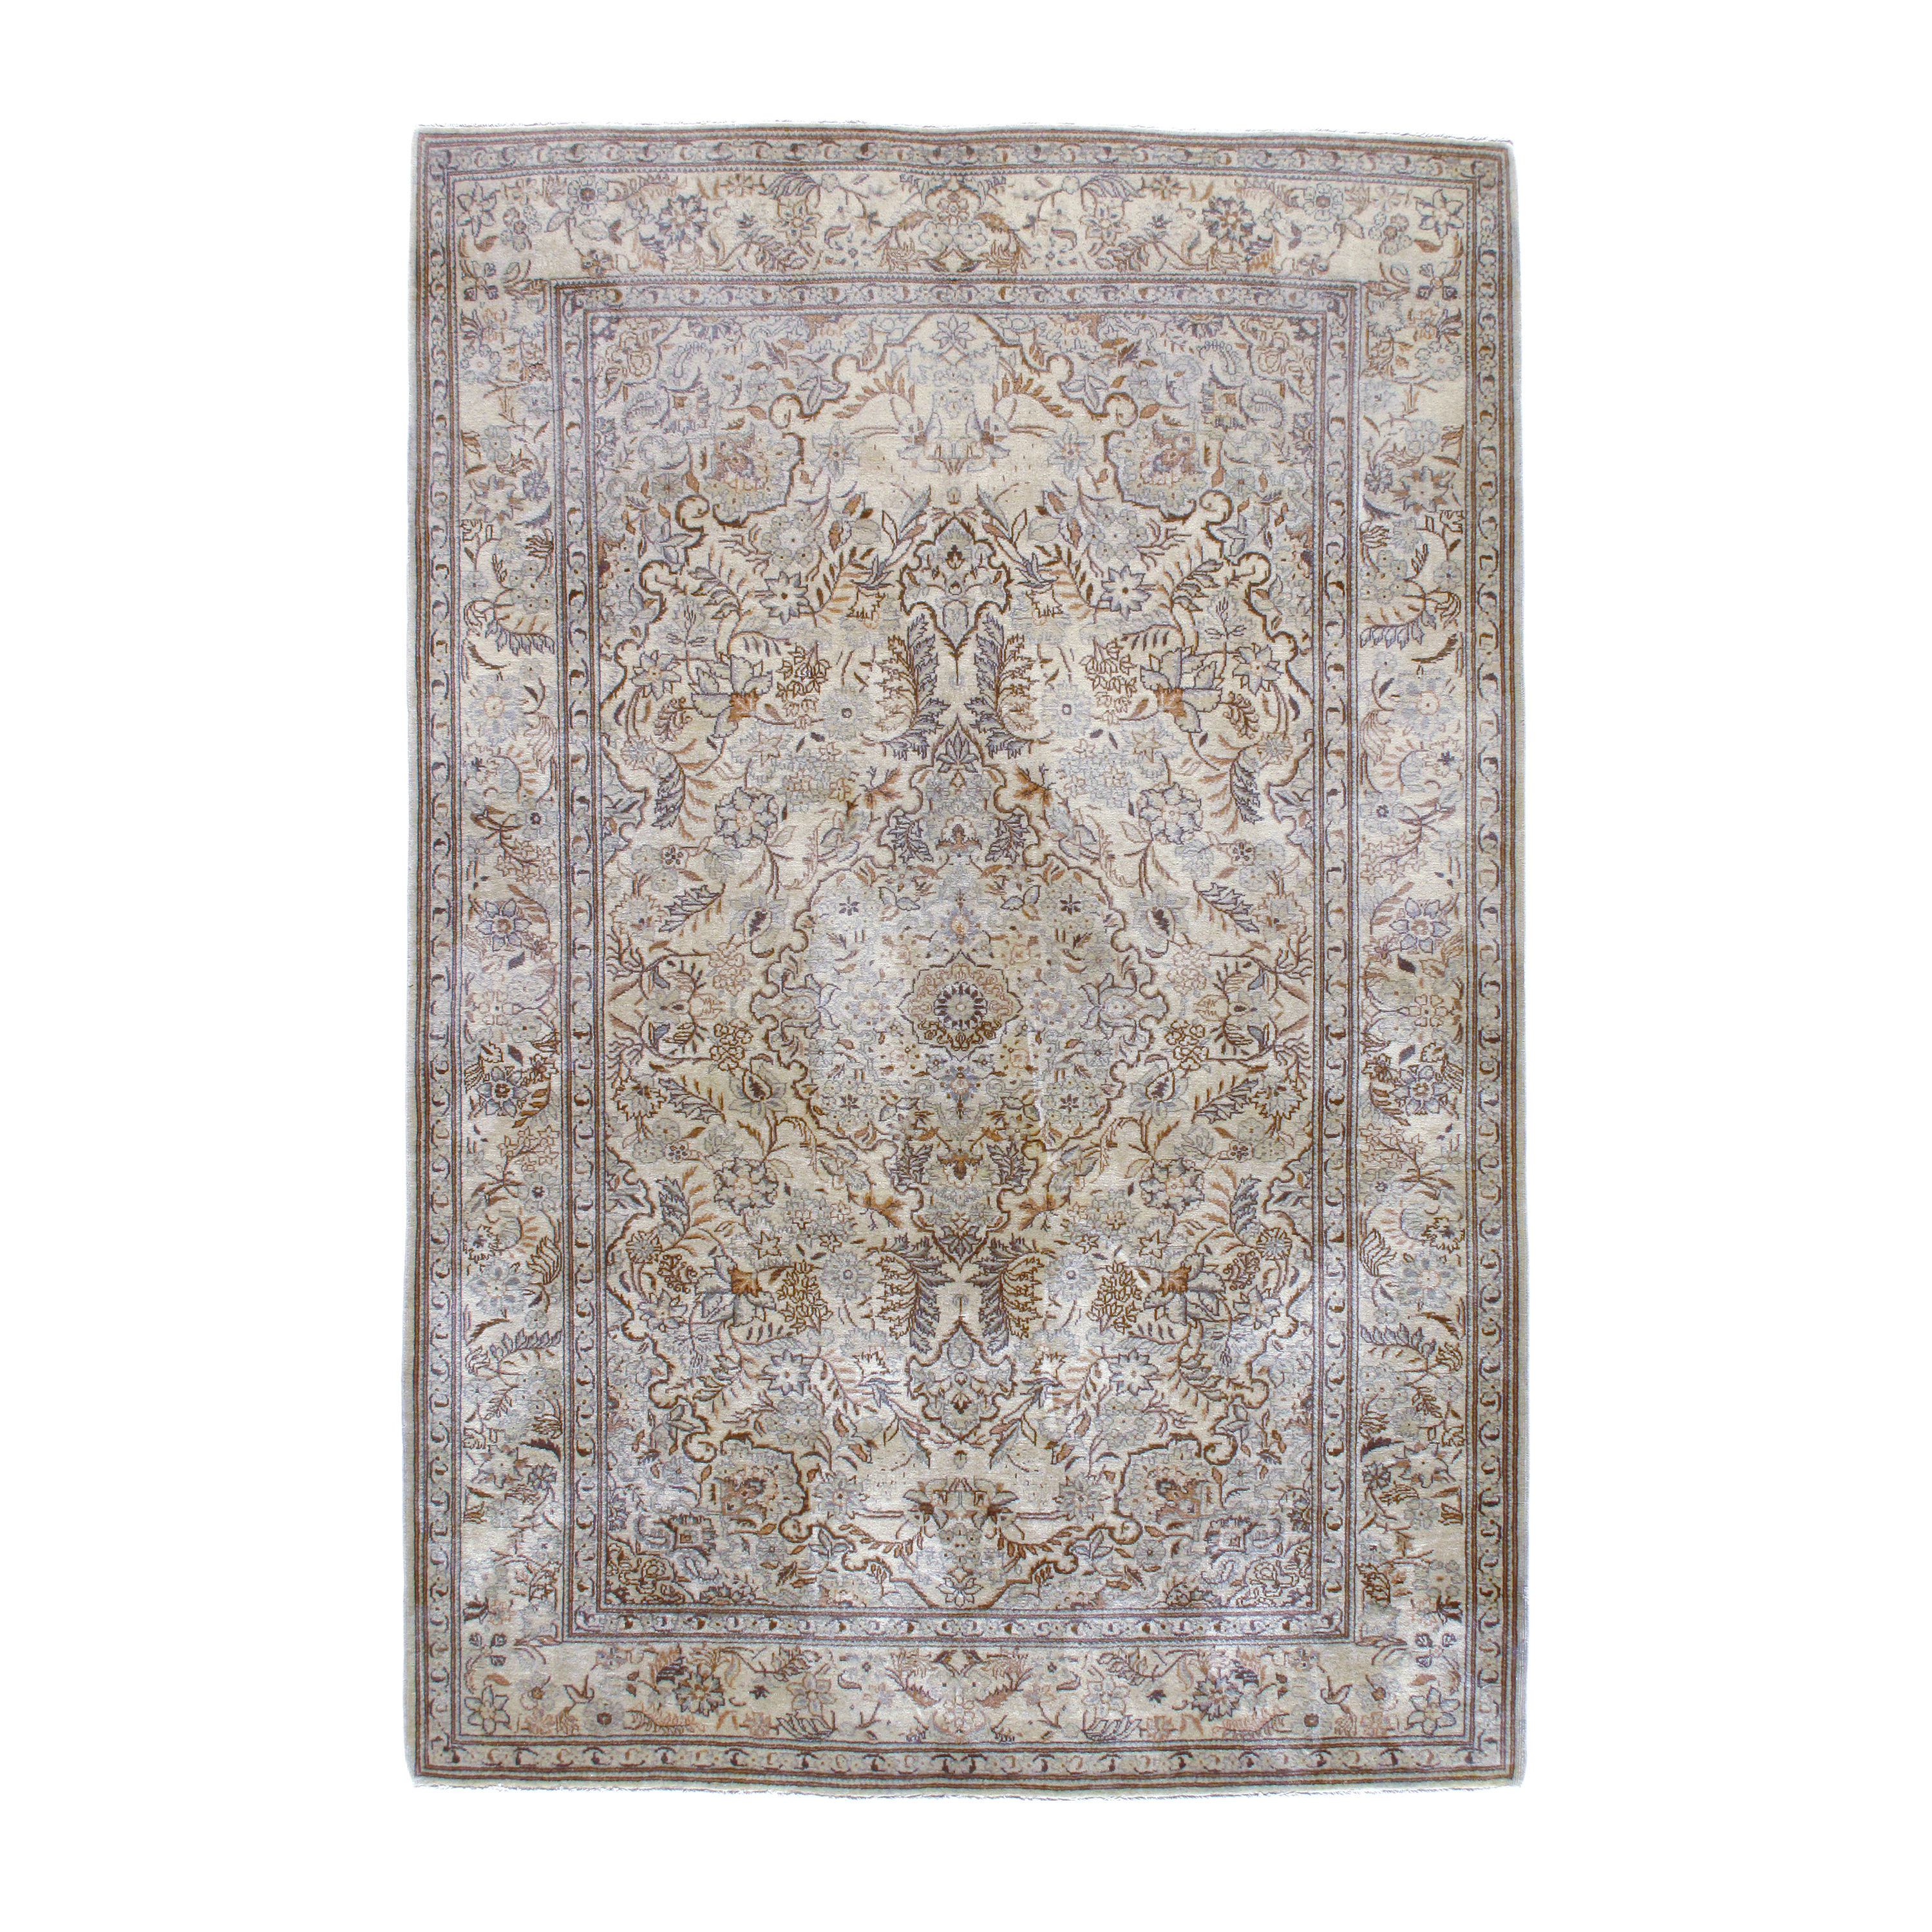 This Persian Kashan rug is hand-knotted and made of 100% wool. 